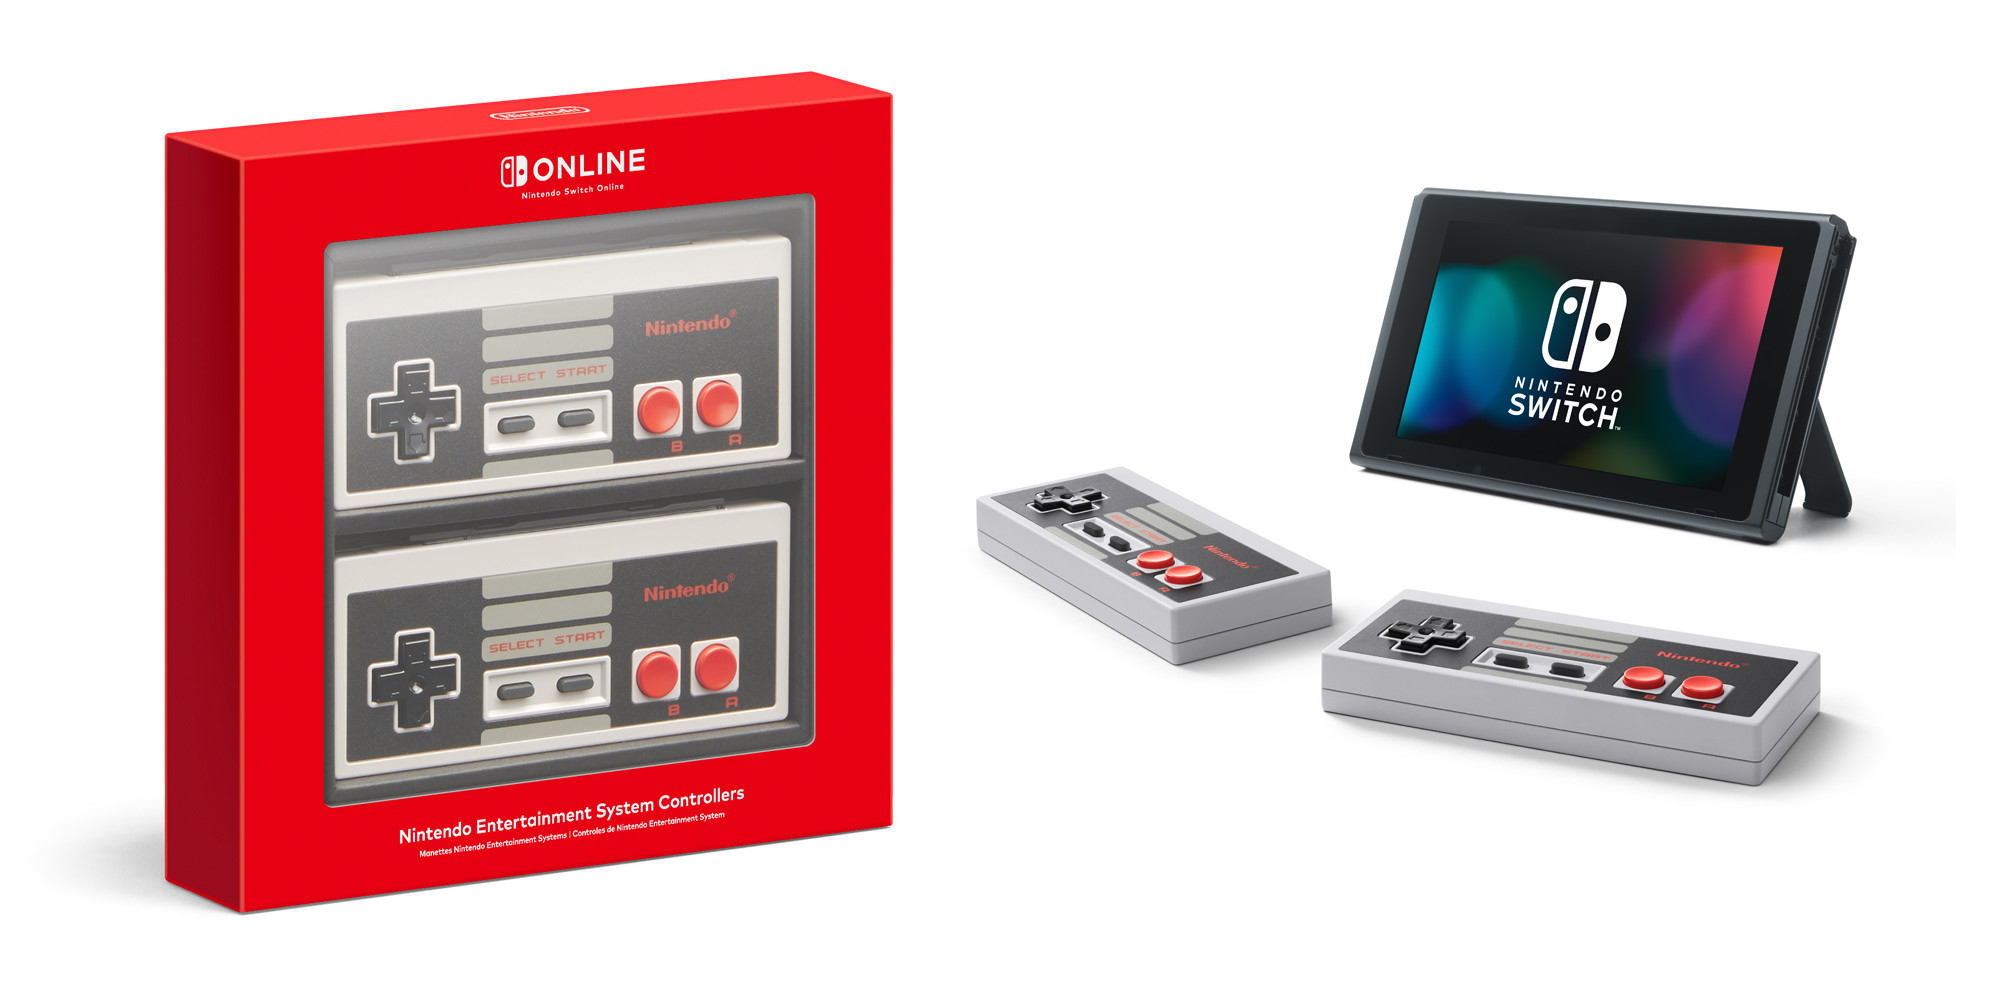 nes controllers switch